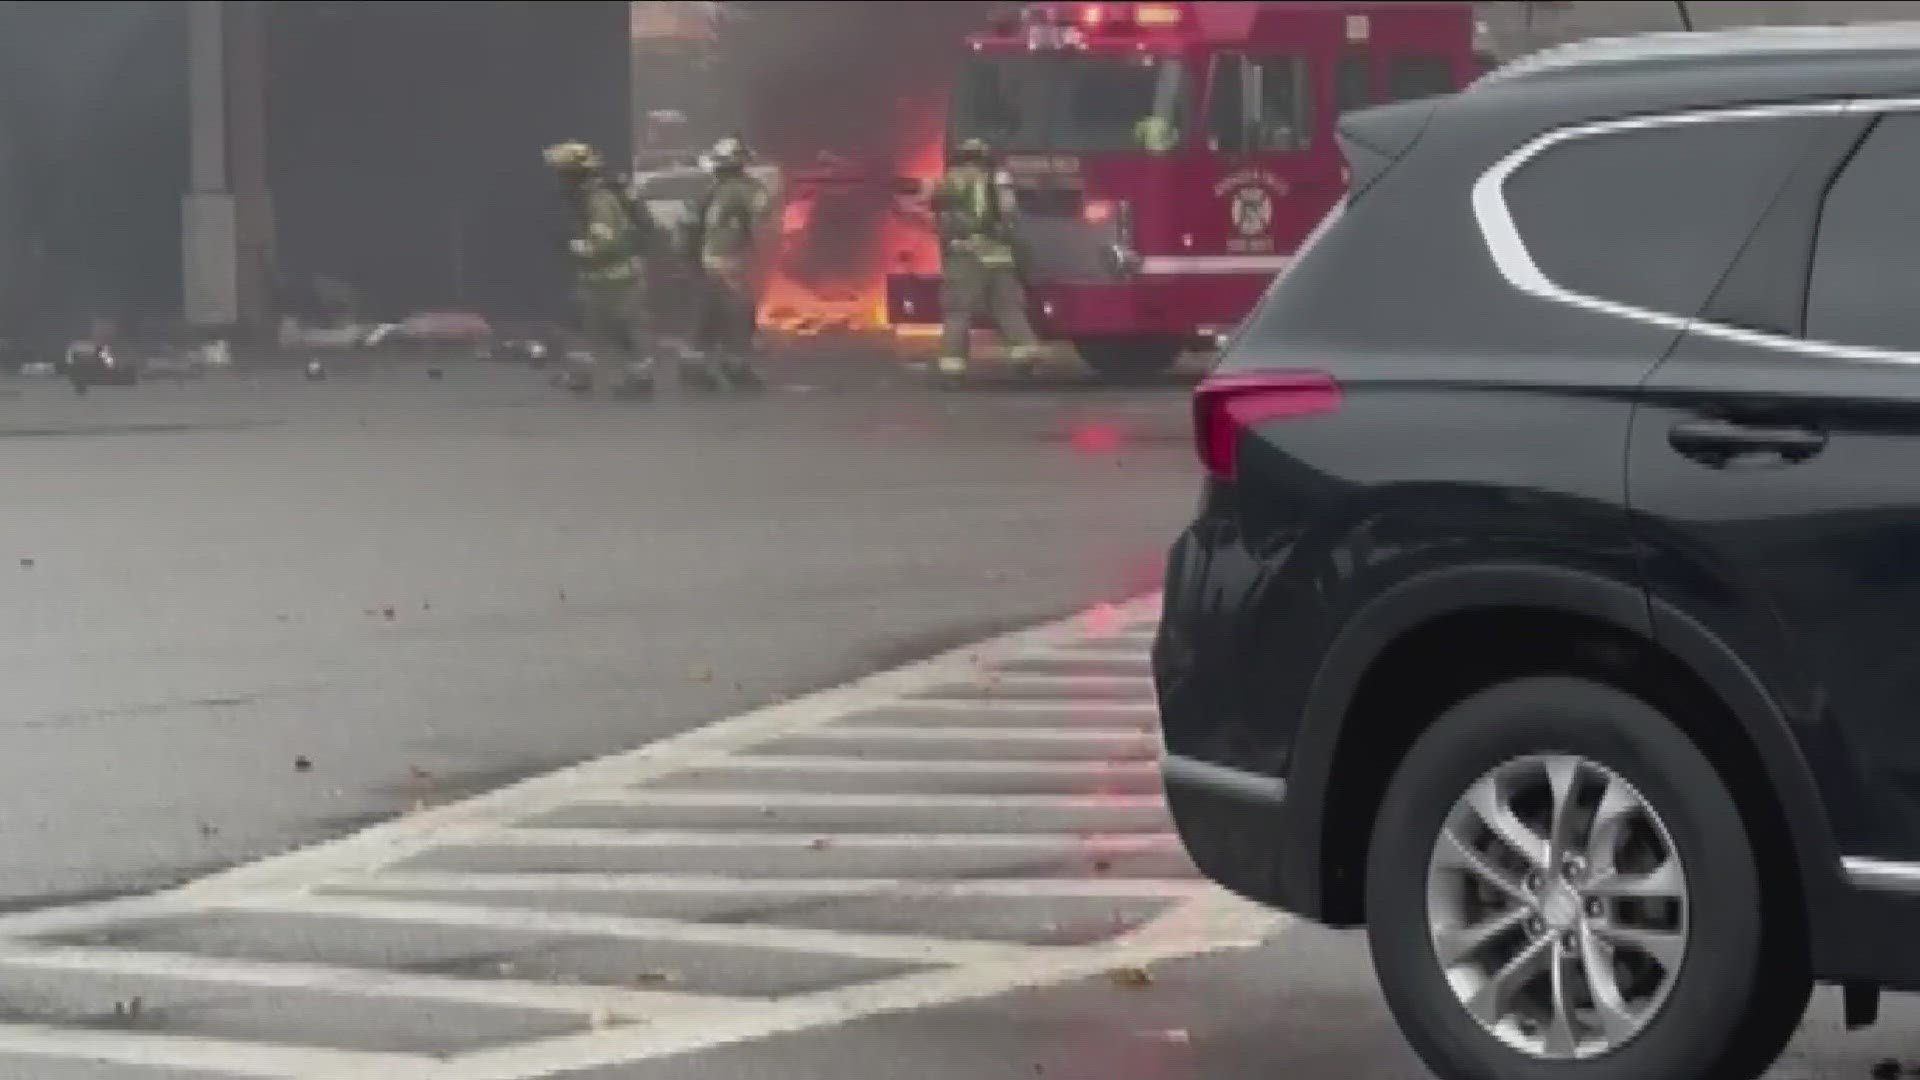 Witnesses shaken by fiery vehicle explosion at the border crossing.